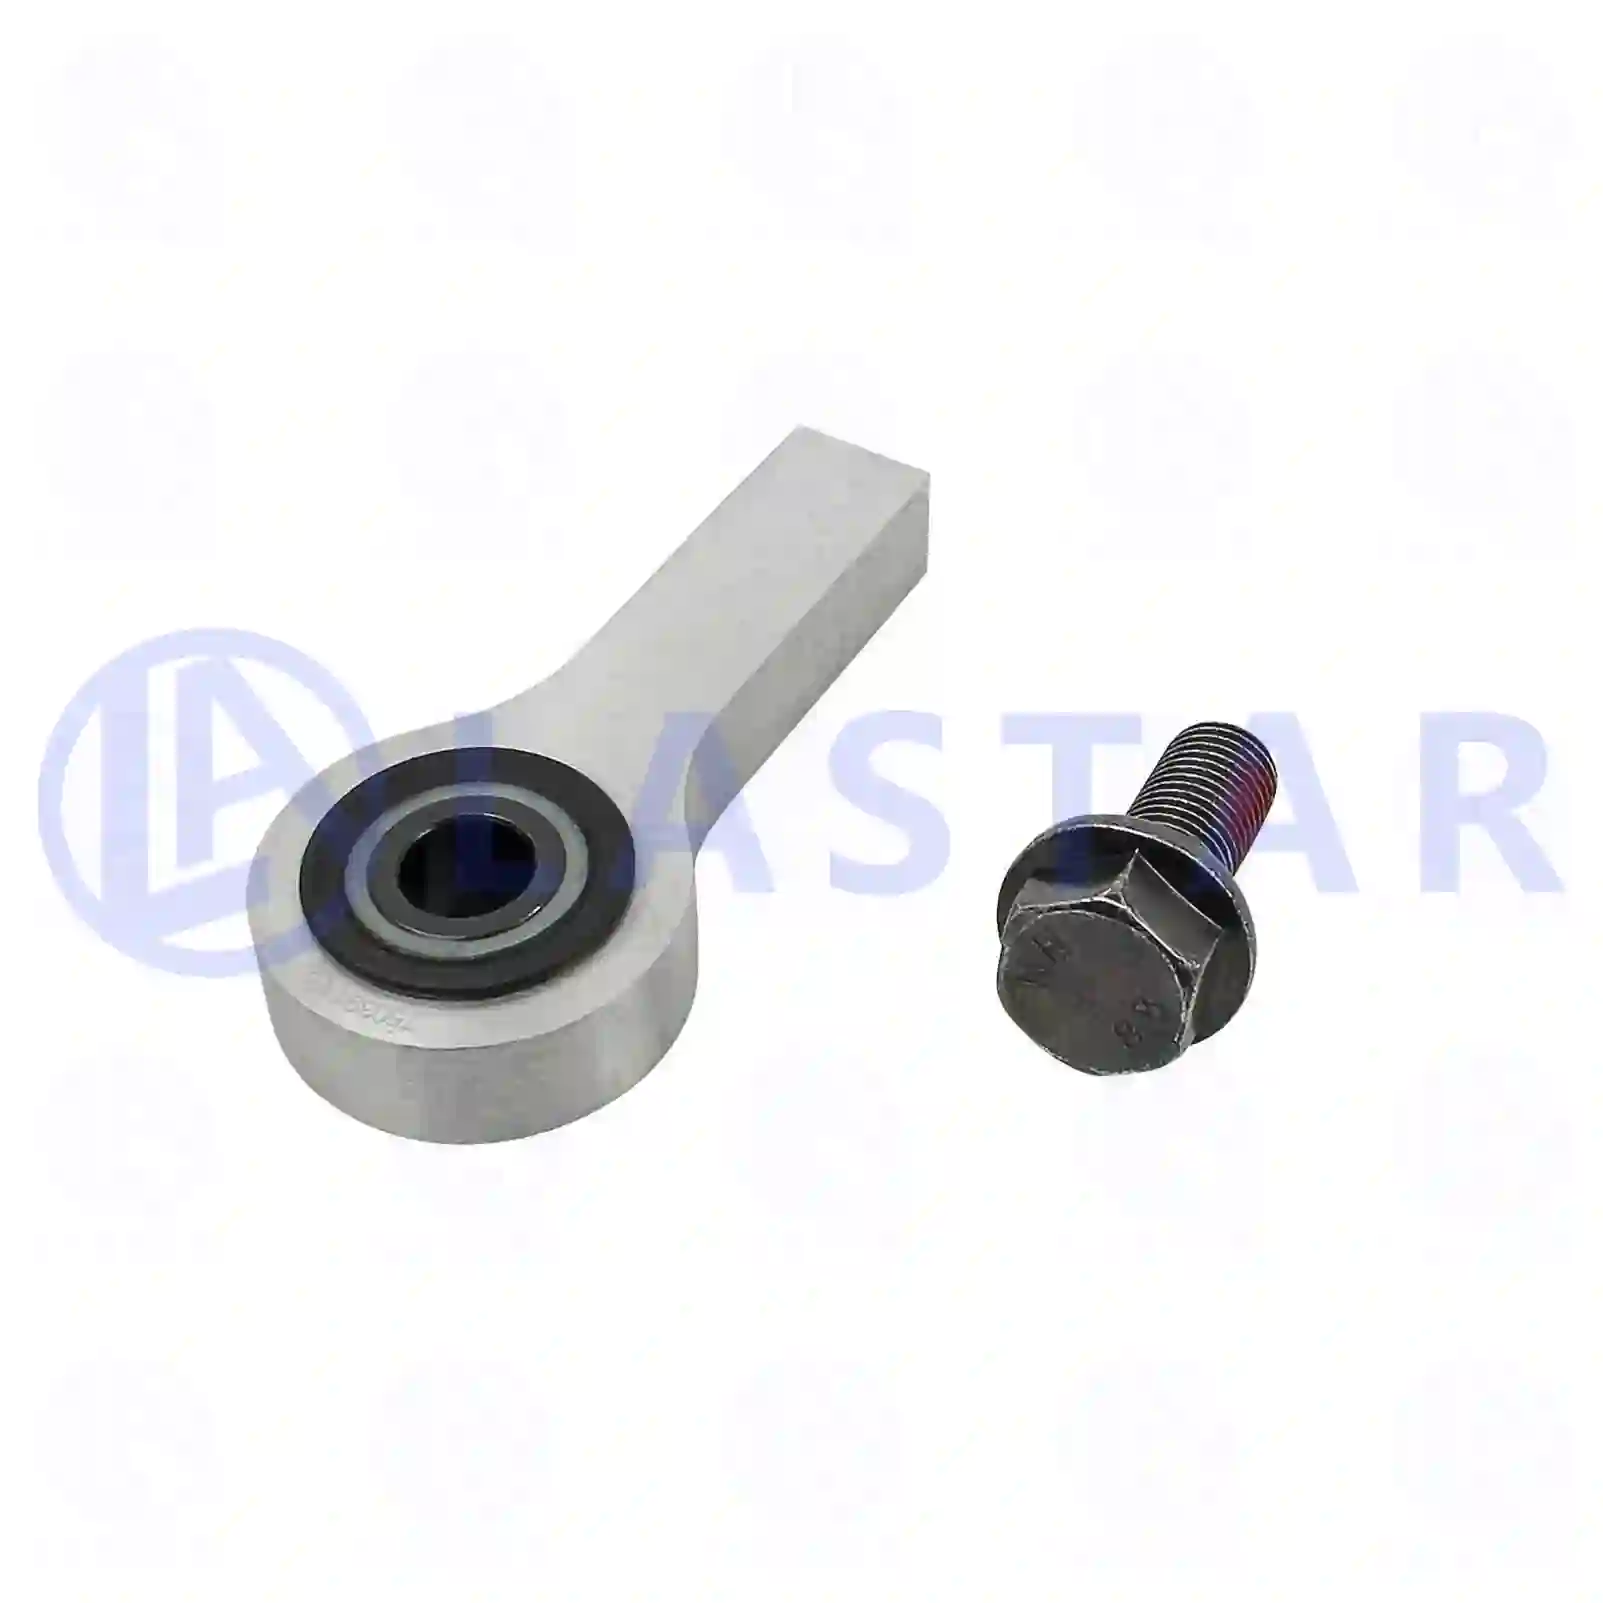 Bearing joint, complete with seal rings, 77736103, 2171715 ||  77736103 Lastar Spare Part | Truck Spare Parts, Auotomotive Spare Parts Bearing joint, complete with seal rings, 77736103, 2171715 ||  77736103 Lastar Spare Part | Truck Spare Parts, Auotomotive Spare Parts